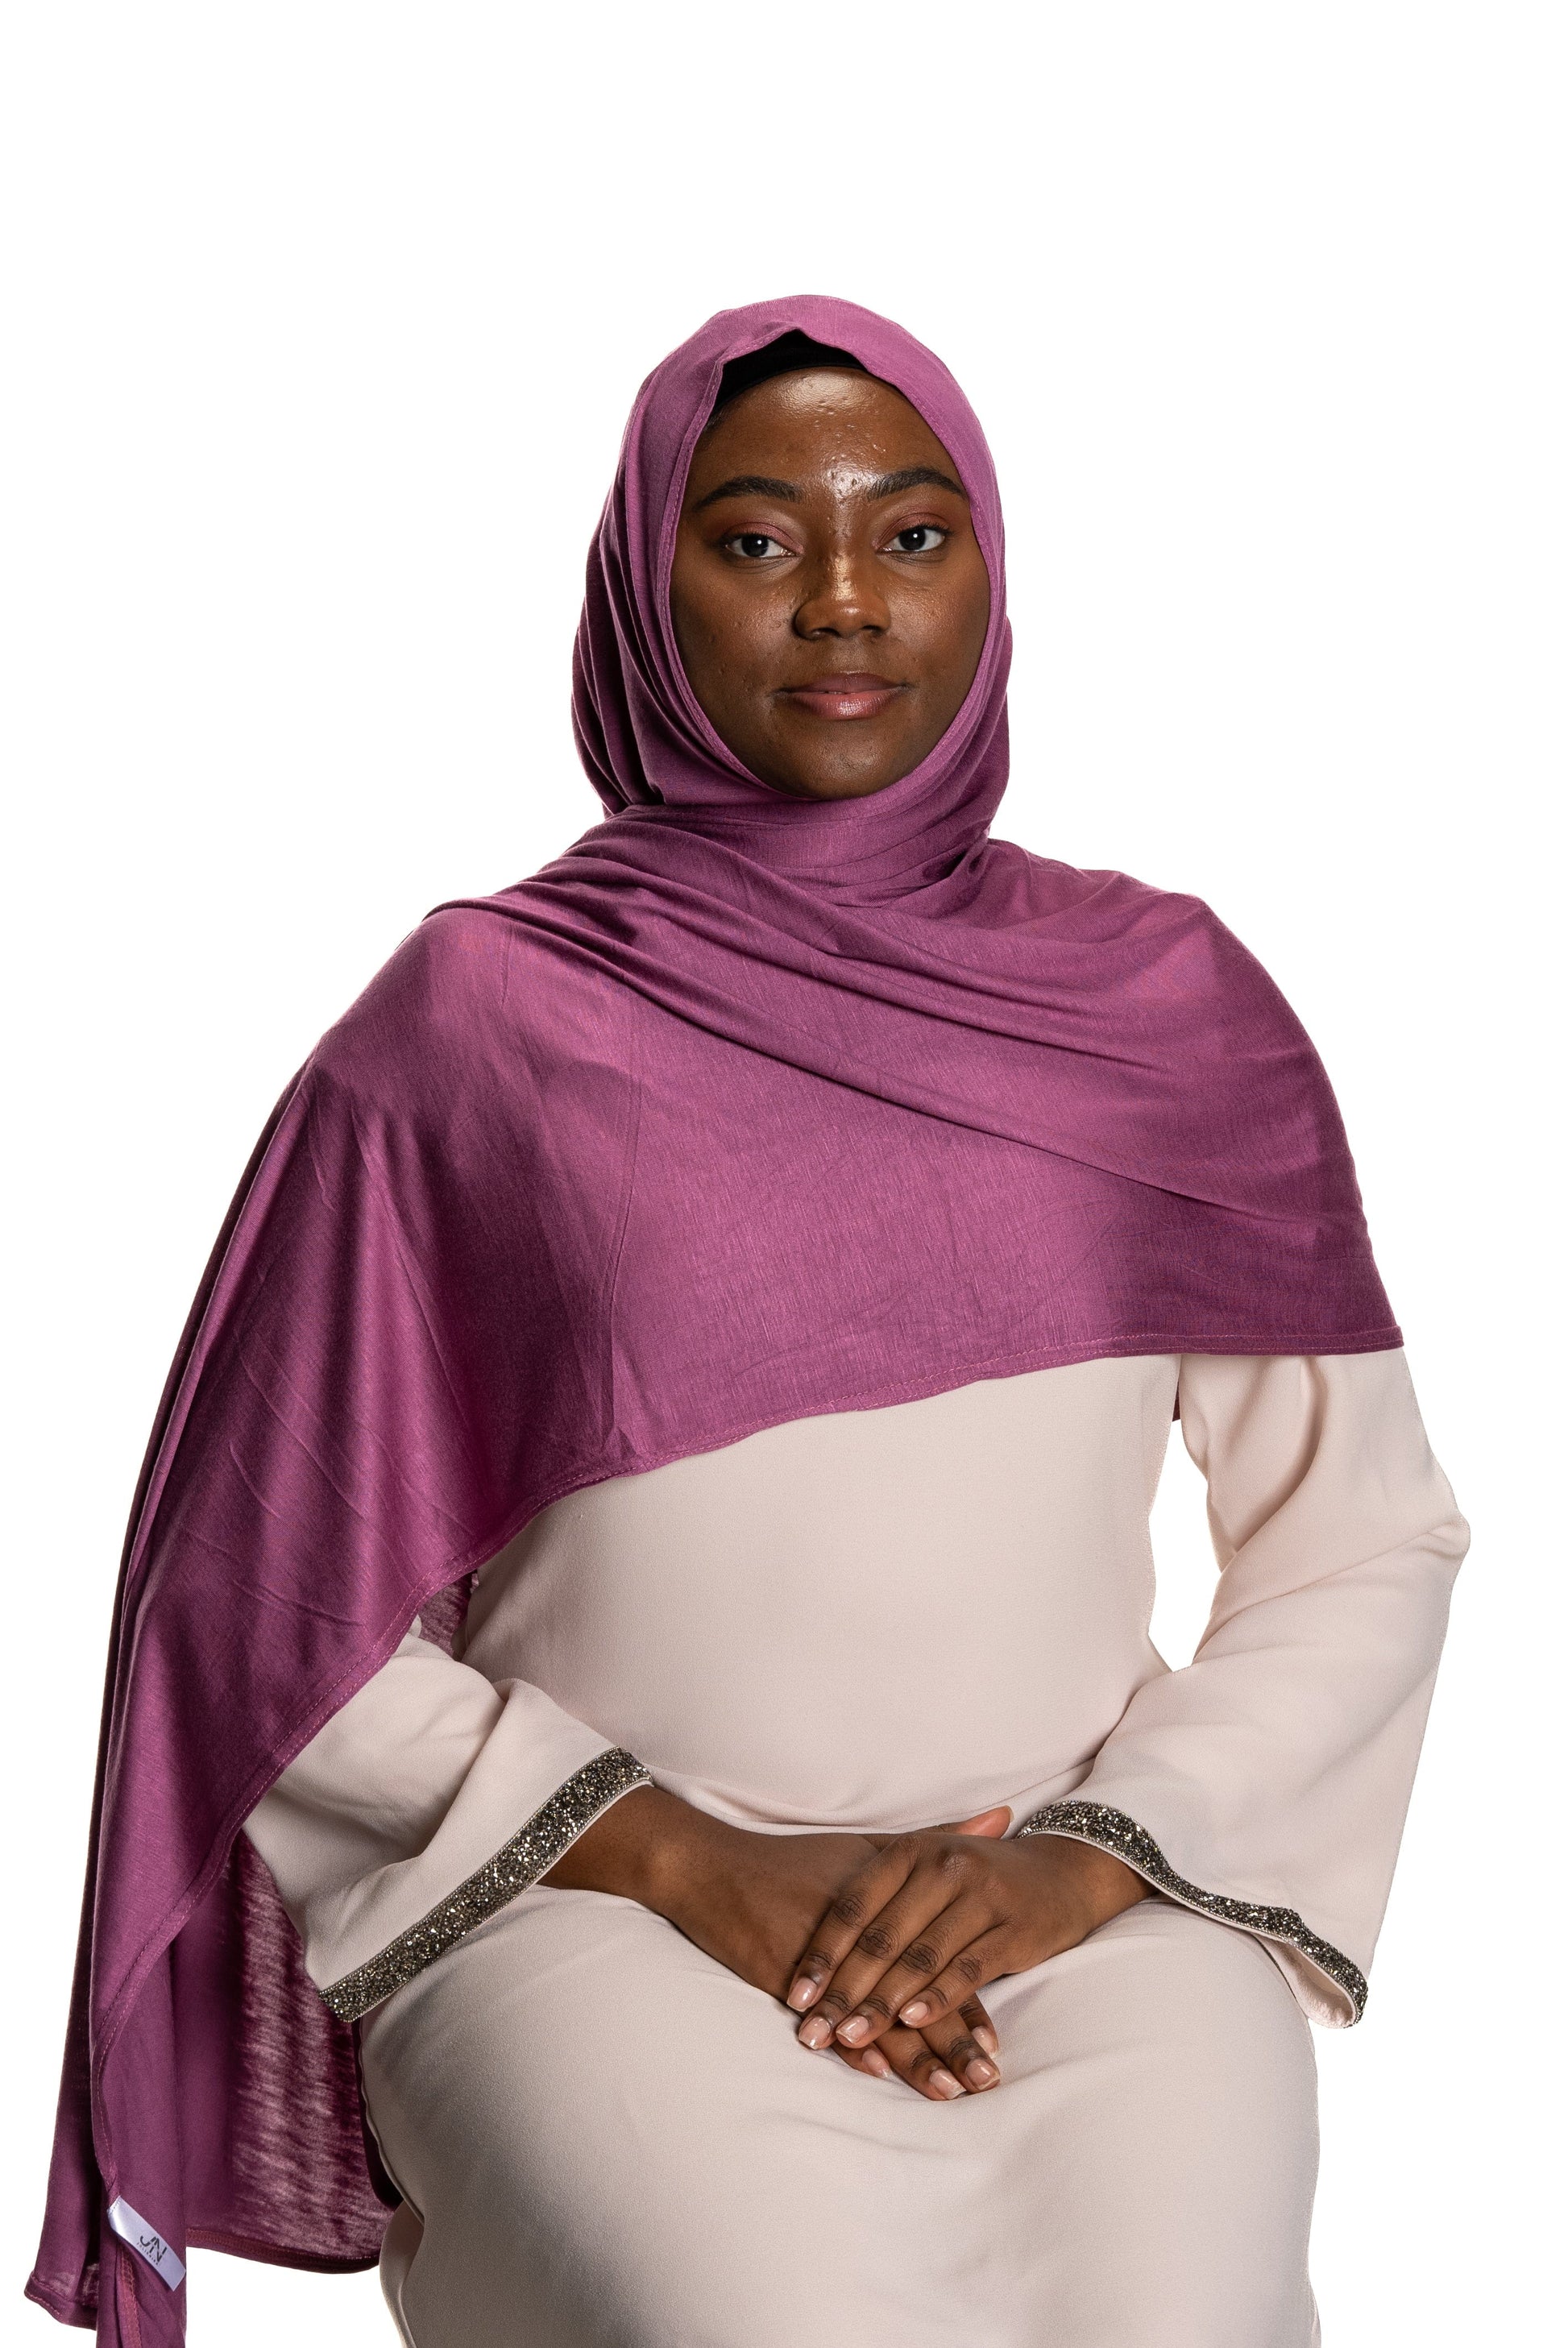 Jolie Nisa Hijab Fuchsia Premium Slip-on Jersey Instant Head Scarf Wrap for Effortless and Stylish Hijab Wear Premium Slip-on instant Jersey Head Scarf Wrap for Effortless and Stylish Hijab Wear!